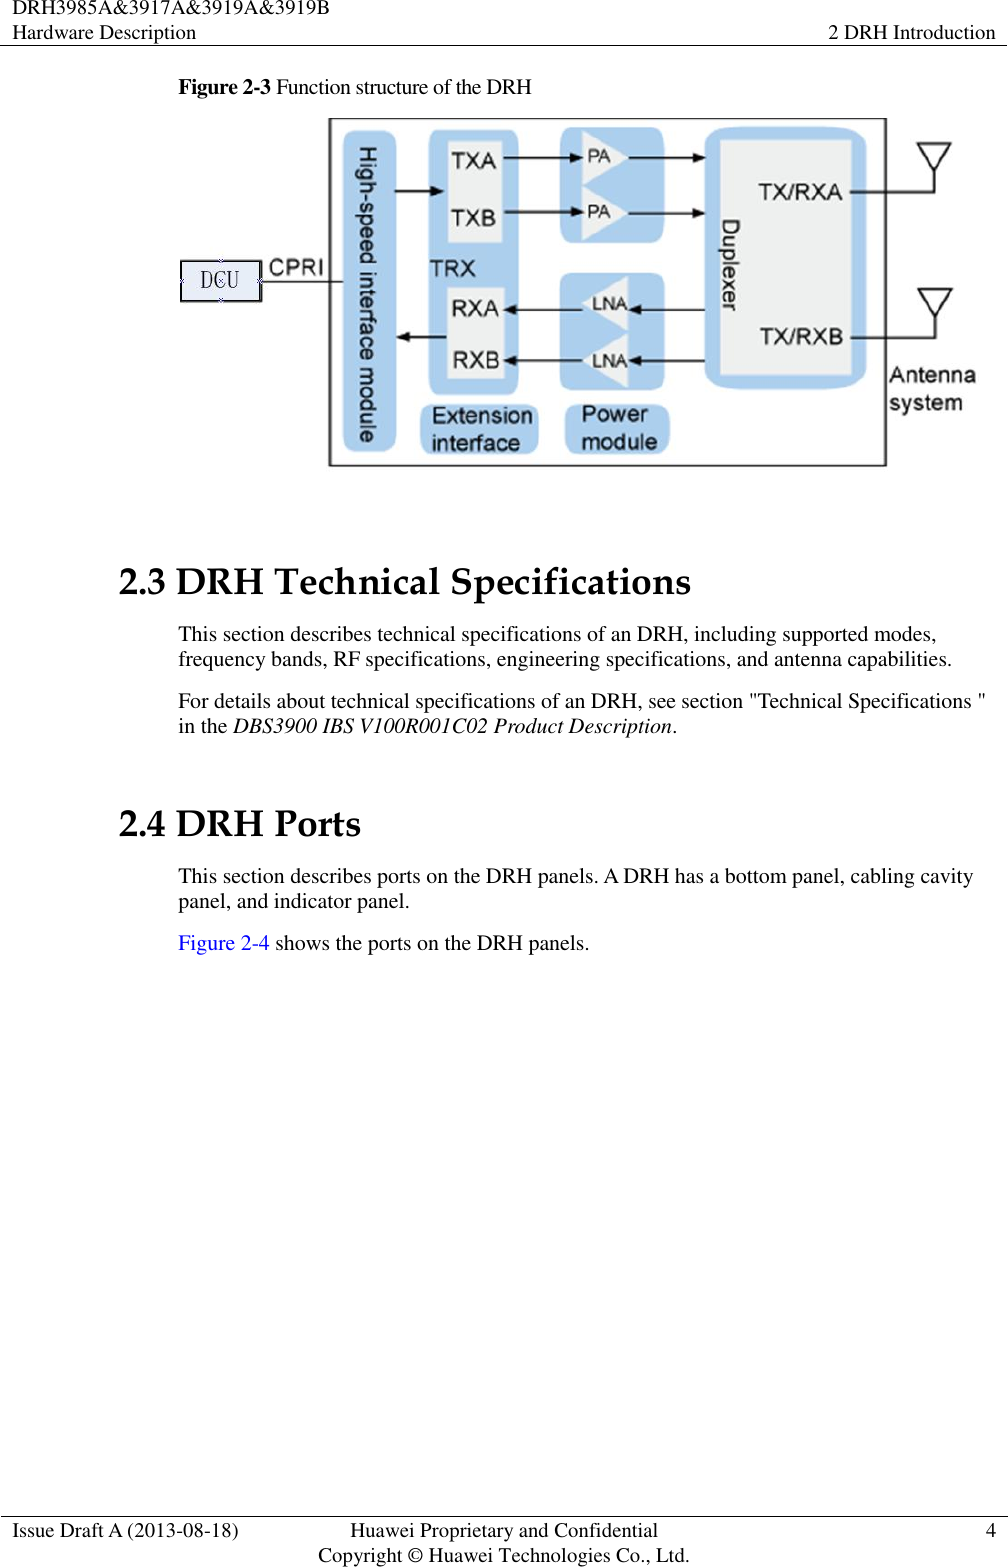 DRH3985A&amp;3917A&amp;3919A&amp;3919B Hardware Description 2 DRH Introduction  Issue Draft A (2013-08-18) Huawei Proprietary and Confidential                                     Copyright © Huawei Technologies Co., Ltd. 4  Figure 2-3 Function structure of the DRH  2.3 DRH Technical Specifications This section describes technical specifications of an DRH, including supported modes, frequency bands, RF specifications, engineering specifications, and antenna capabilities. For details about technical specifications of an DRH, see section &quot;Technical Specifications &quot; in the DBS3900 IBS V100R001C02 Product Description. 2.4 DRH Ports This section describes ports on the DRH panels. A DRH has a bottom panel, cabling cavity panel, and indicator panel. Figure 2-4 shows the ports on the DRH panels. 